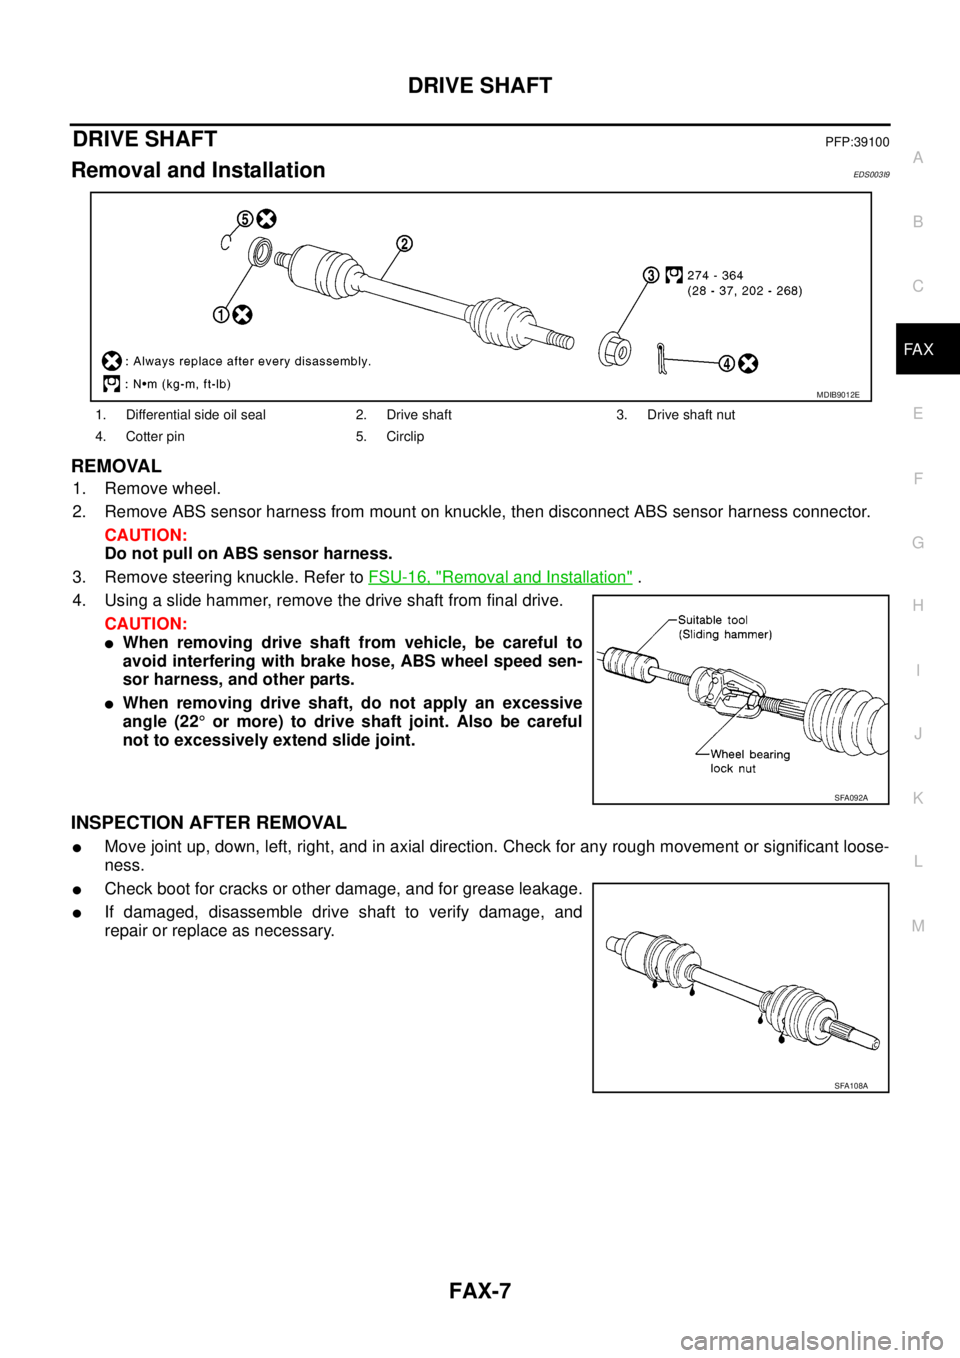 NISSAN NAVARA 2005  Repair Workshop Manual DRIVE SHAFT
FAX-7
C
E
F
G
H
I
J
K
L
MA
B
FA X
DRIVE SHAFTPFP:39100
Removal and InstallationEDS003I9
REMOVAL
1. Remove wheel.
2. Remove ABS sensor harness from mount on knuckle, then disconnect ABS sen